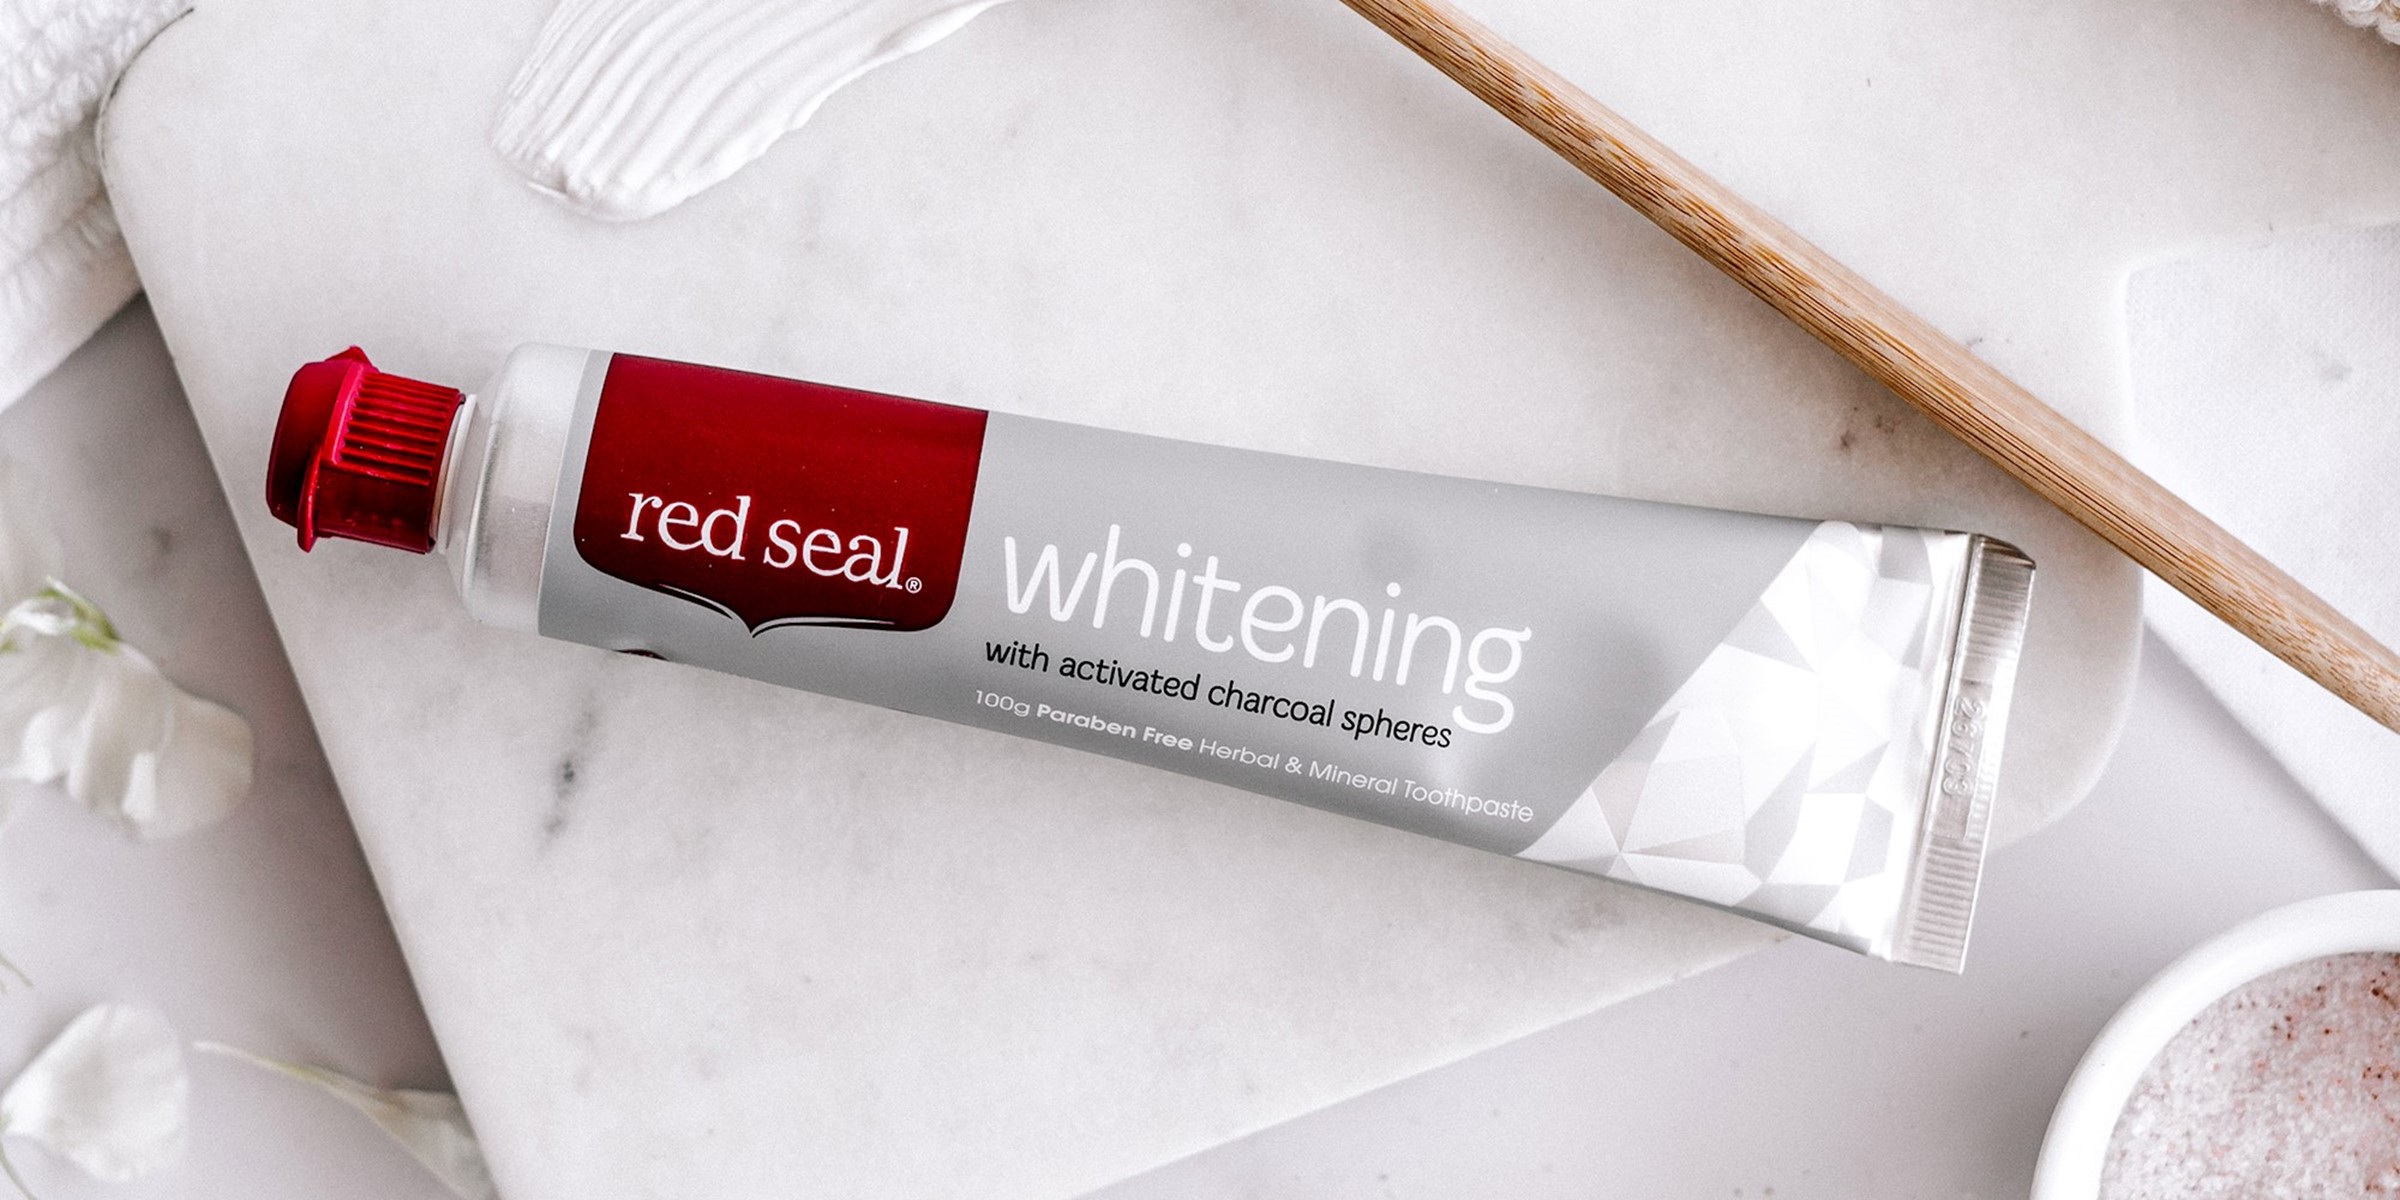 Red Seal Whitening Toothpaste